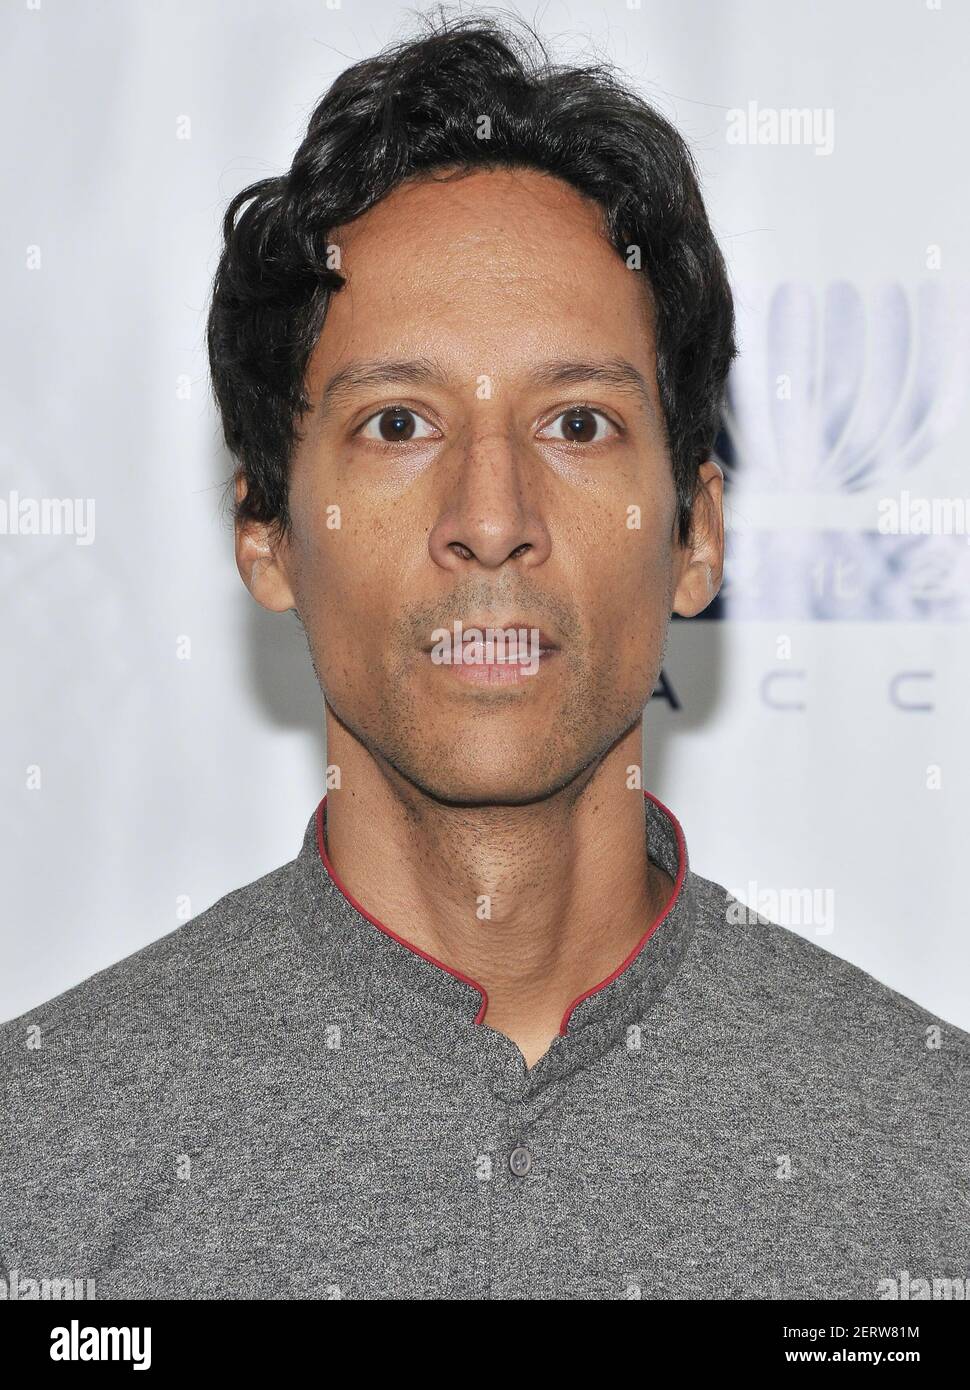 Danny Pudi at The Comedy Comedy Festival Presents The Musical Musical Comedy Show: A Musical Comedy Show held at the JACCC Garden Room in Los Angeles, CA on Sunday, ?October 14, 2018. (Photo By Sthanlee B. Mirador/Sipa USA) Stock Photo